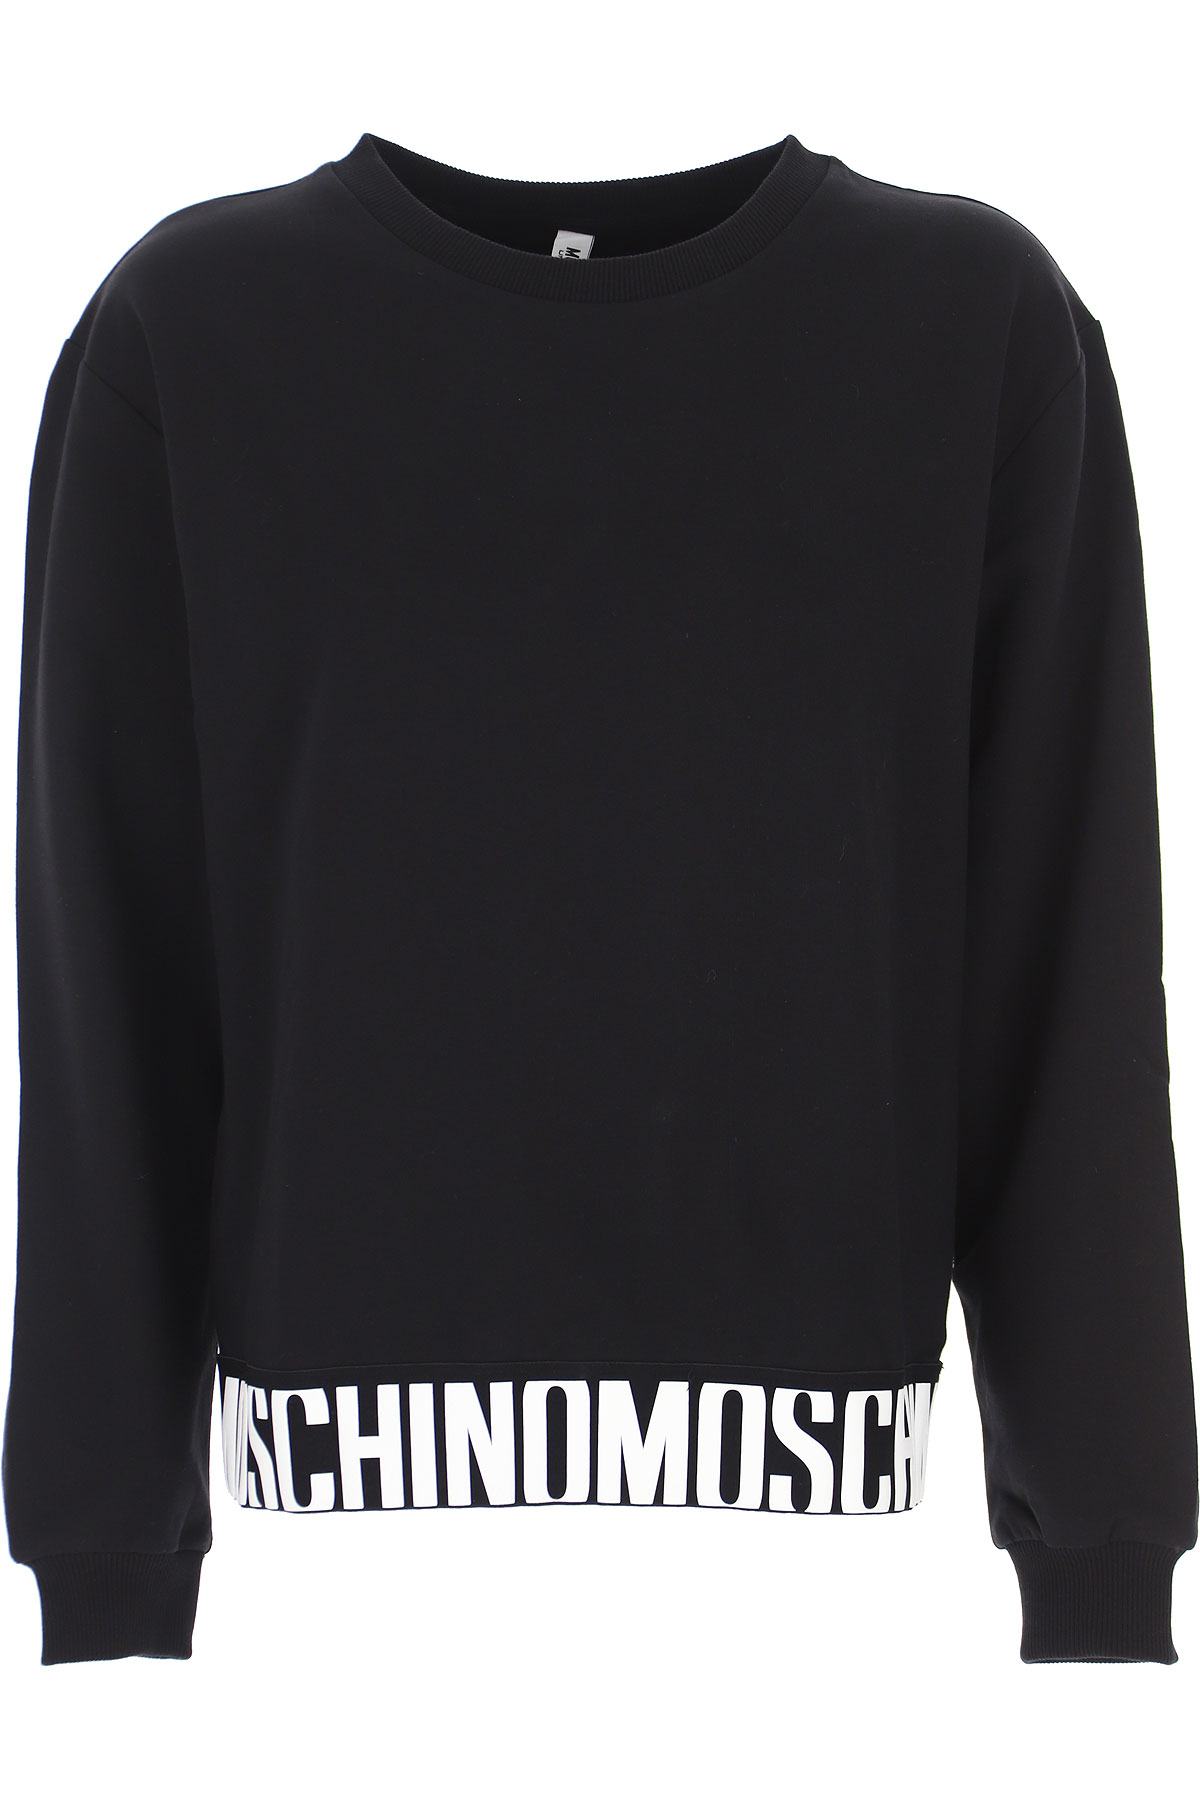 Womens Clothing Moschino, Style code: a1739-9029-0555